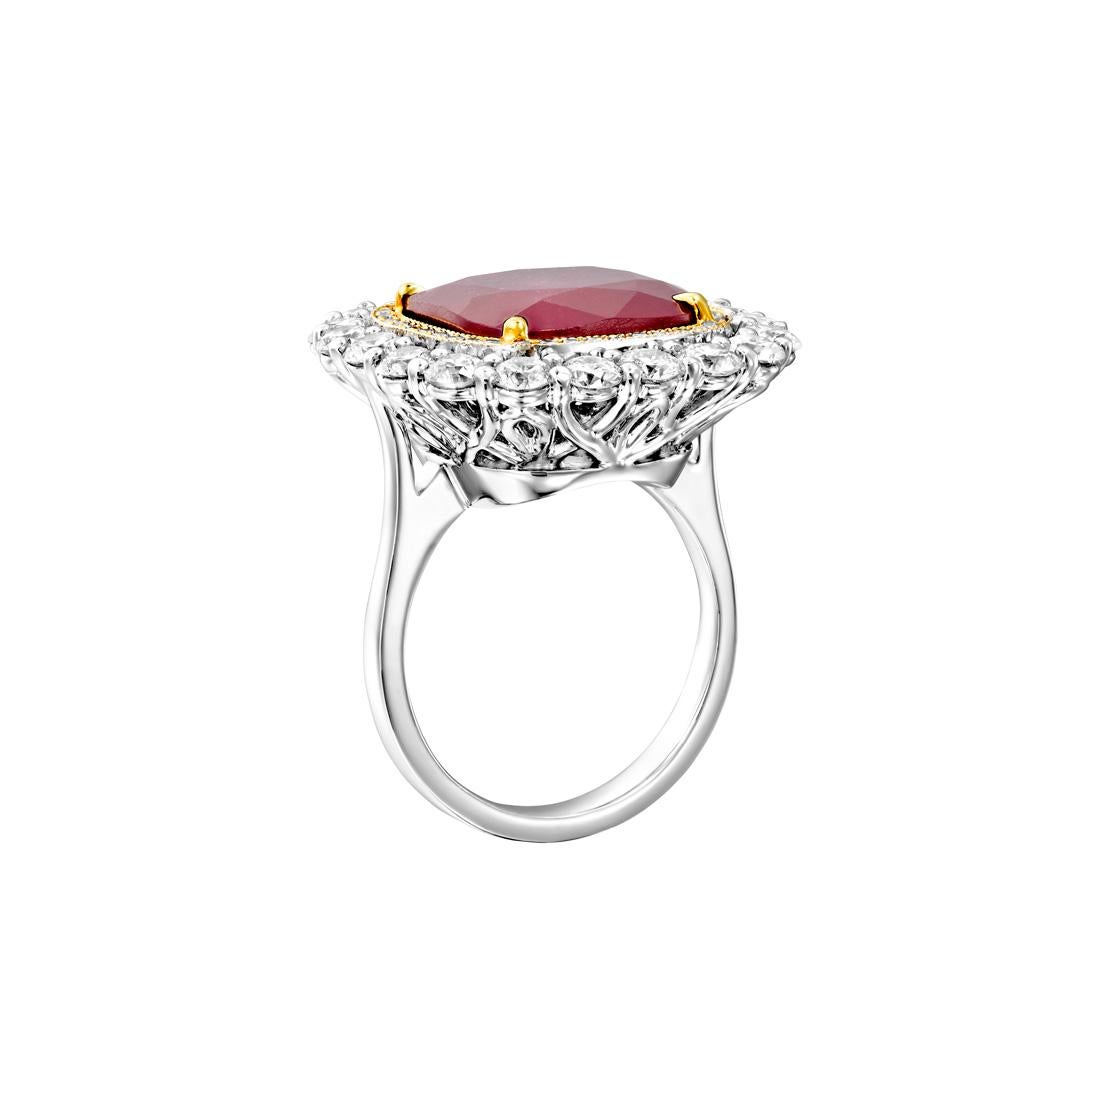 Introducing the exquisite Geraldo Ruby Diamond Ring, a true masterpiece that exudes timeless beauty and unparalleled craftsmanship. This remarkable ring showcases an extraordinary combination of elegance and glamour, featuring a stunning array of